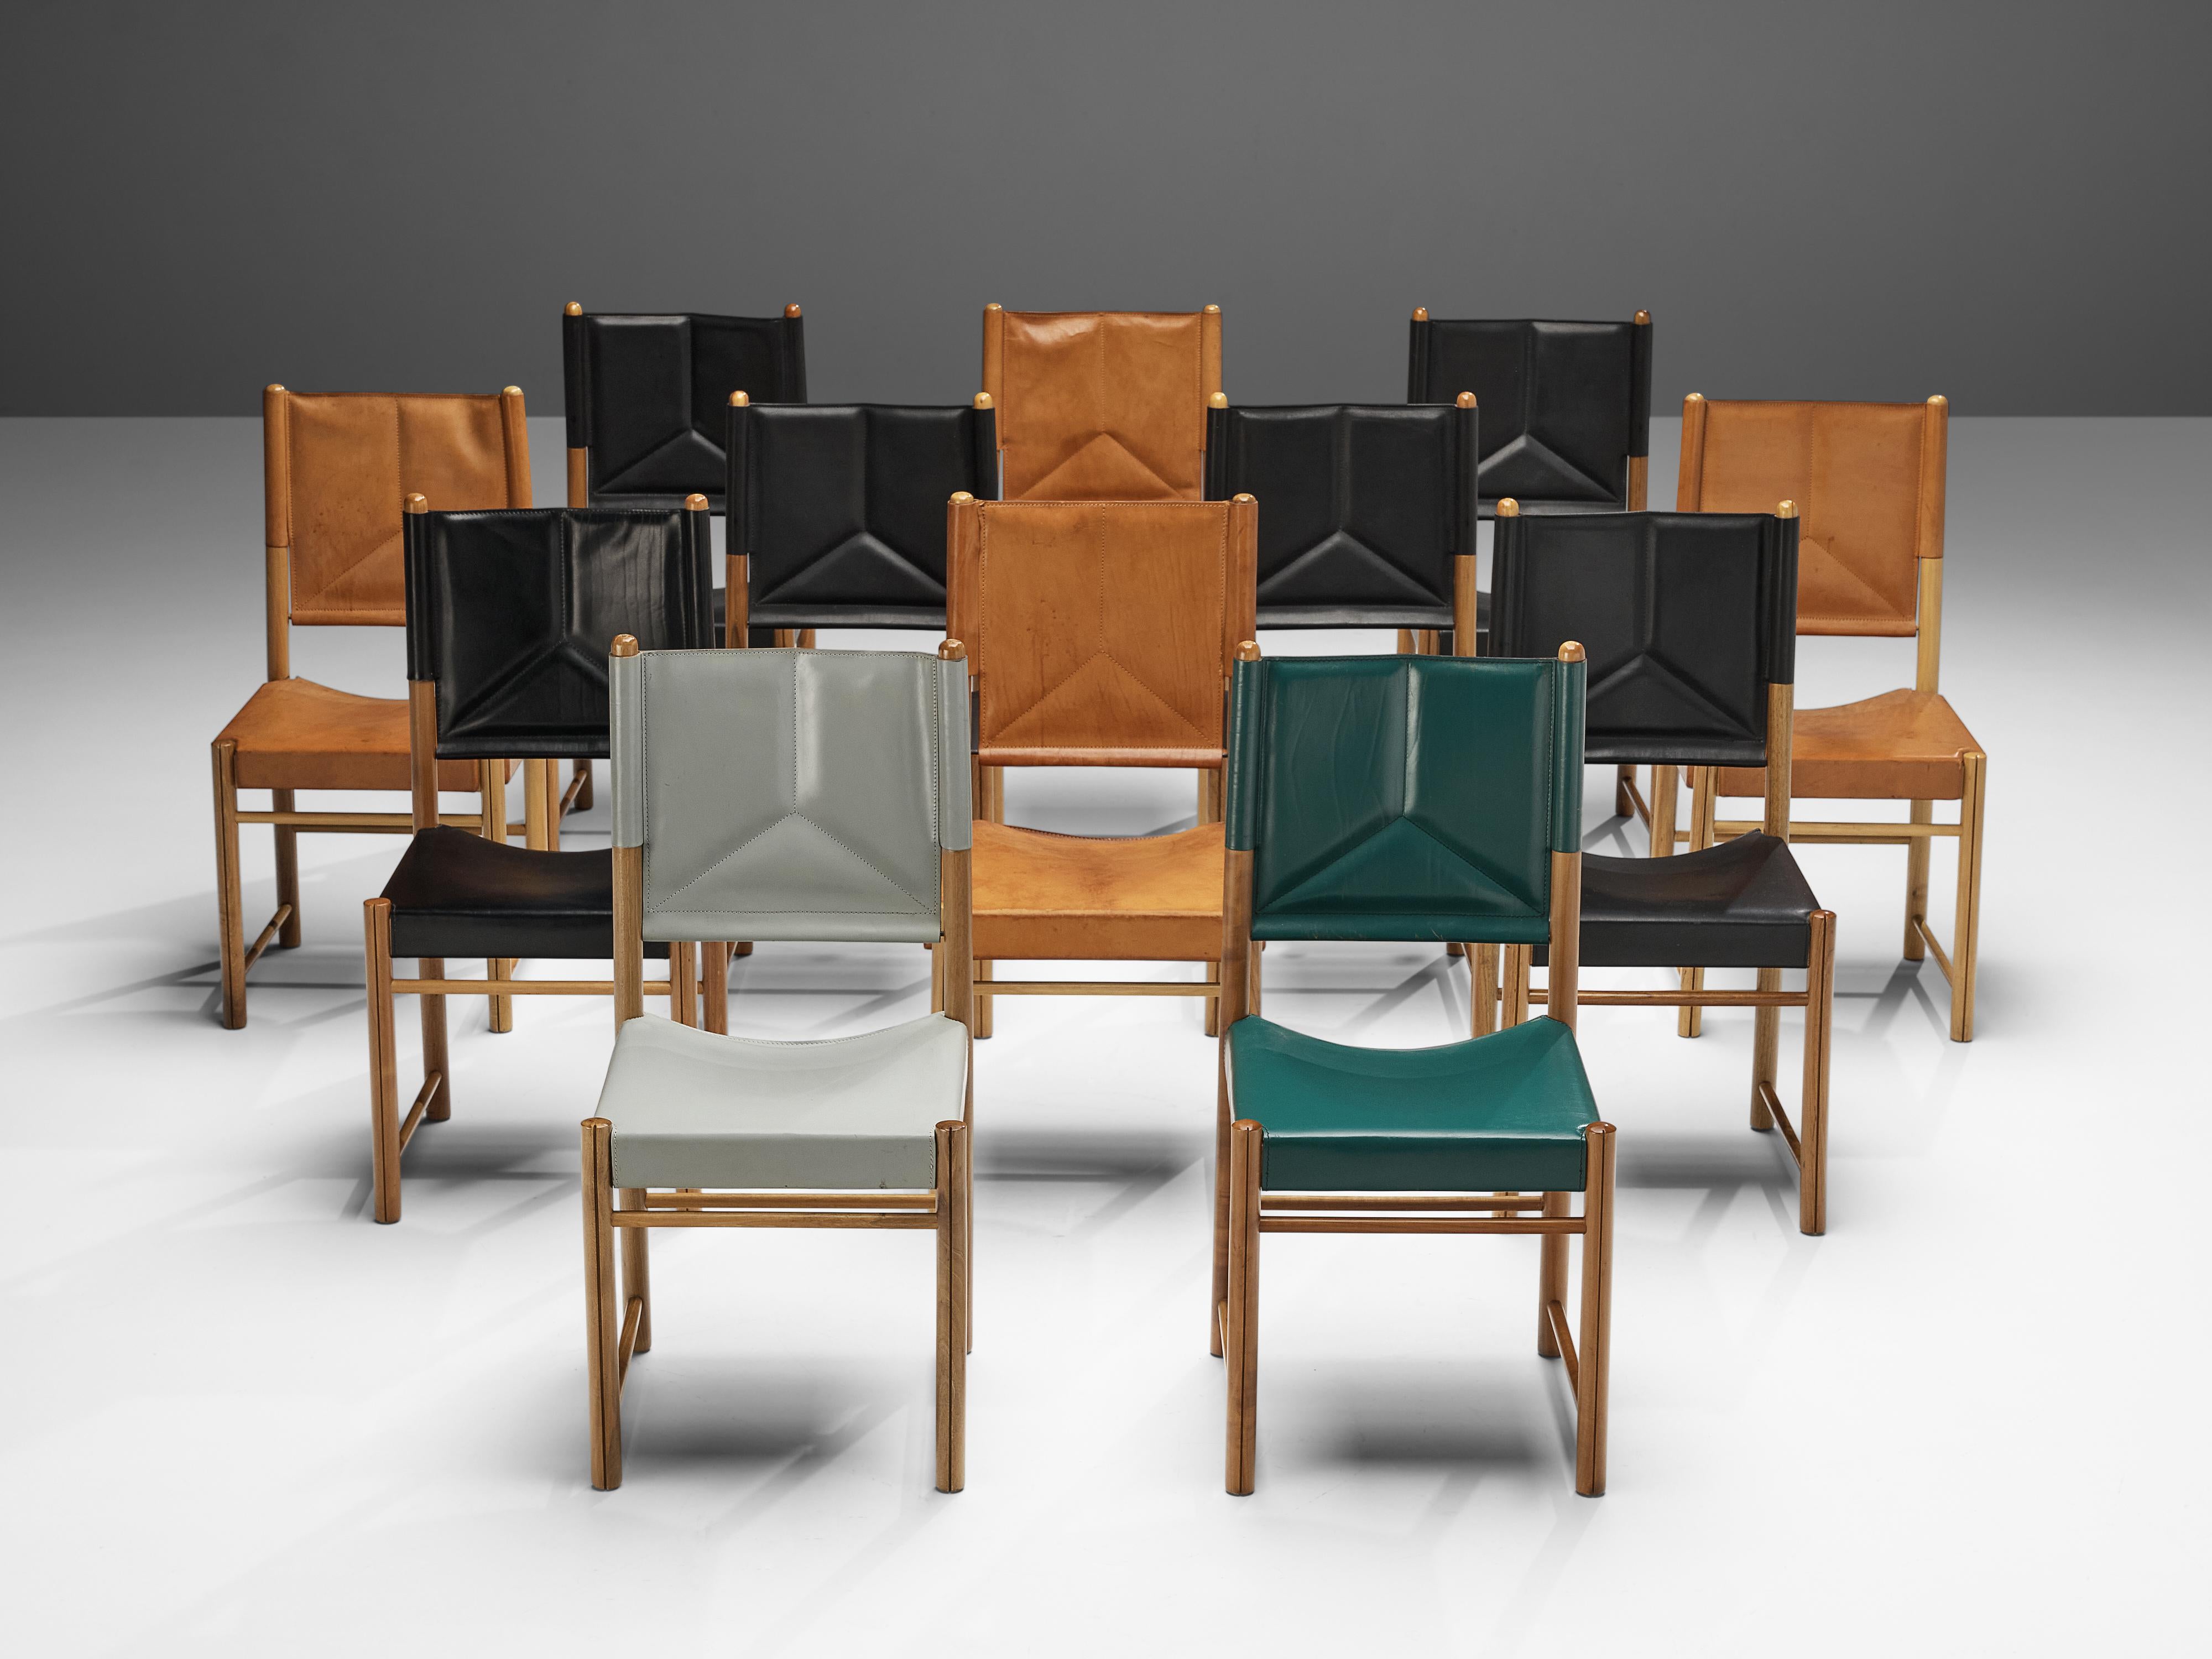 Set of dining chairs, leather, walnut, Italy, 1980s

This striking set of dining chairs surprises with a color range from green, black and grey to cognac. Together the colorful leather seats and backrests form an admirable set. The curved seat and